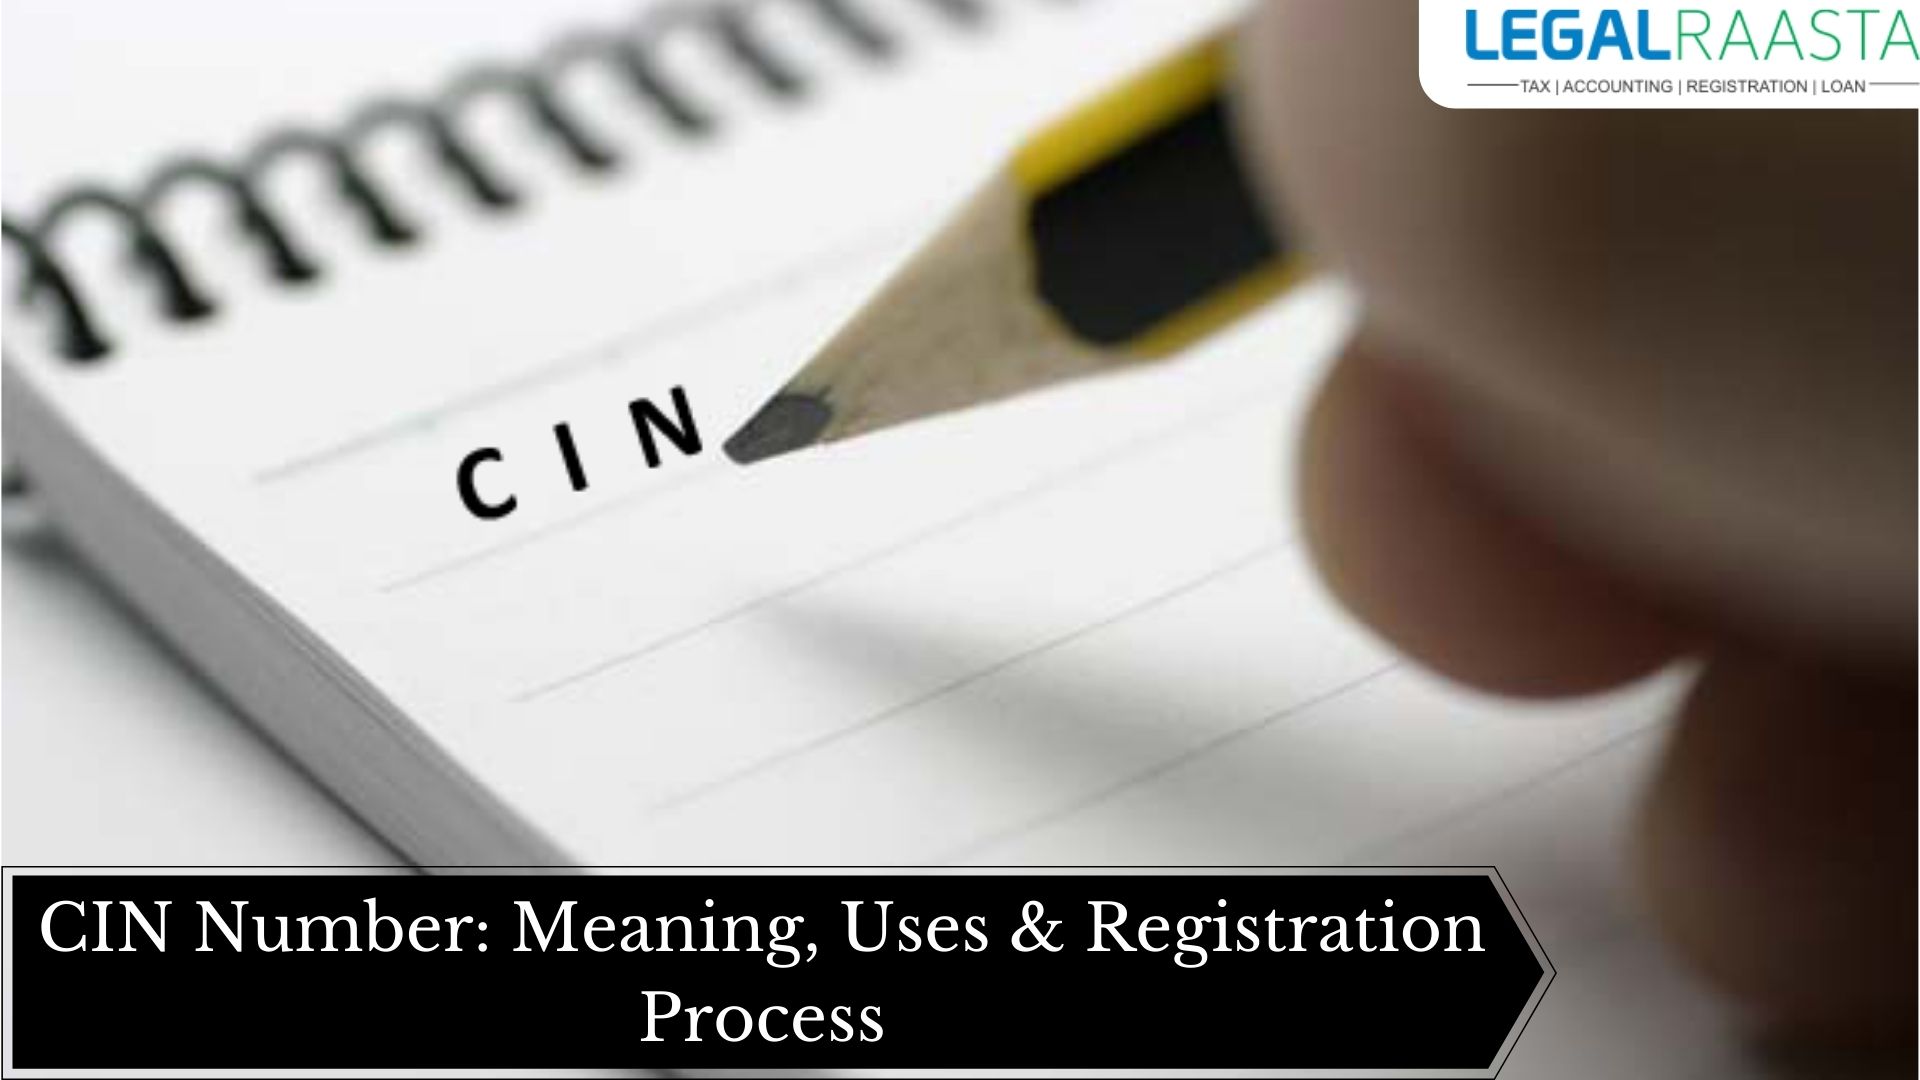 CIN Number: Meaning, Uses & Registration Process